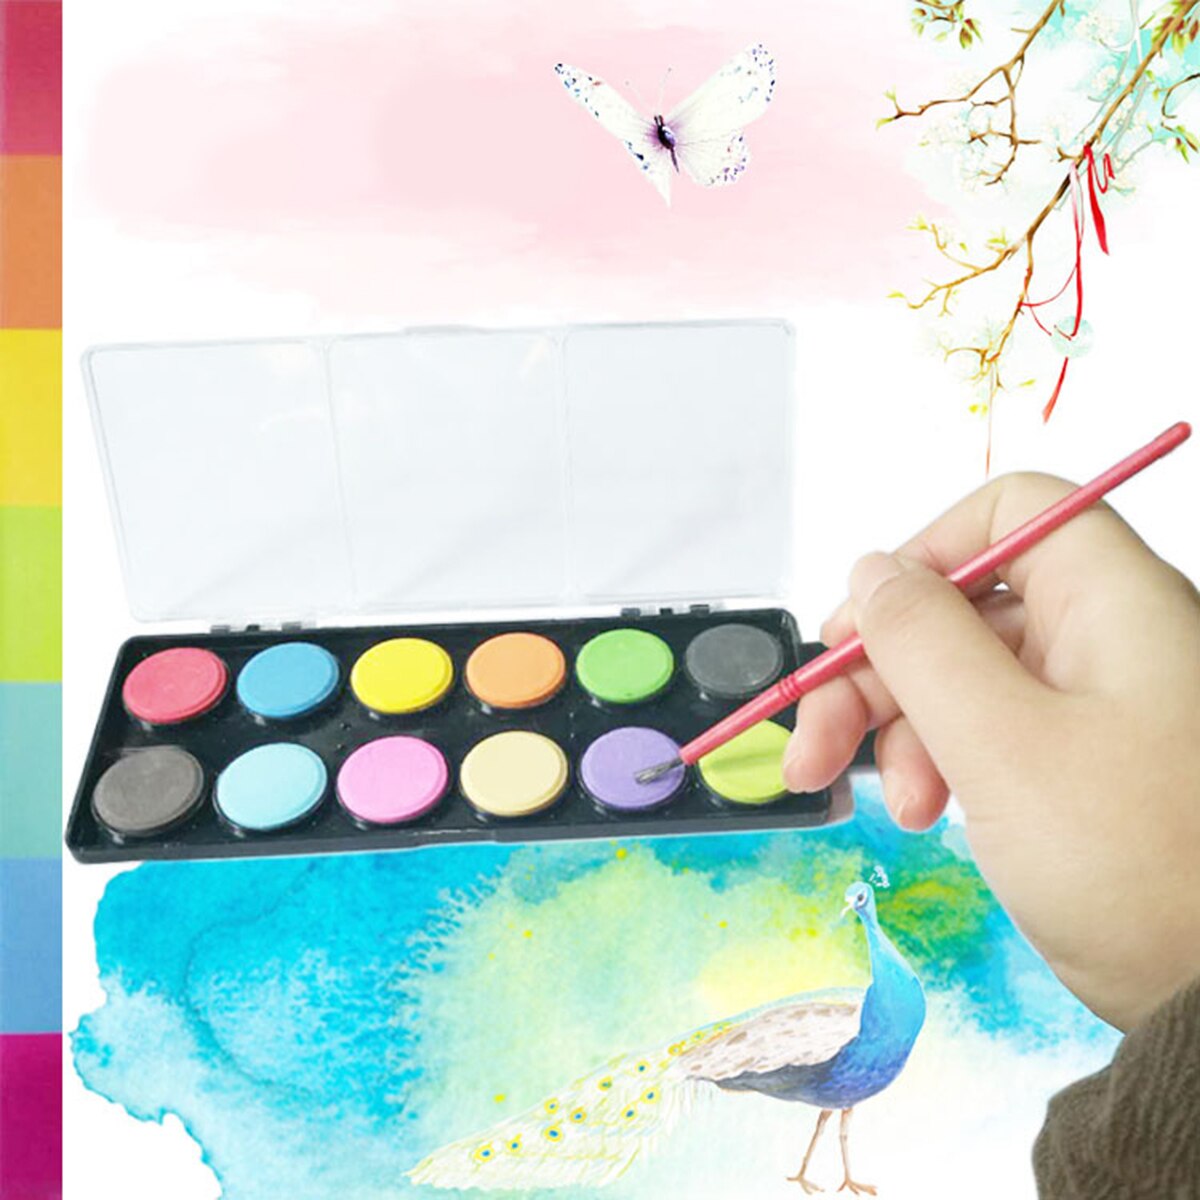 12 Colors Solid Water-color Paint Pigment Portable Drawing Painting Set with a Paintbrush Art Supplies for Artists Students Kids